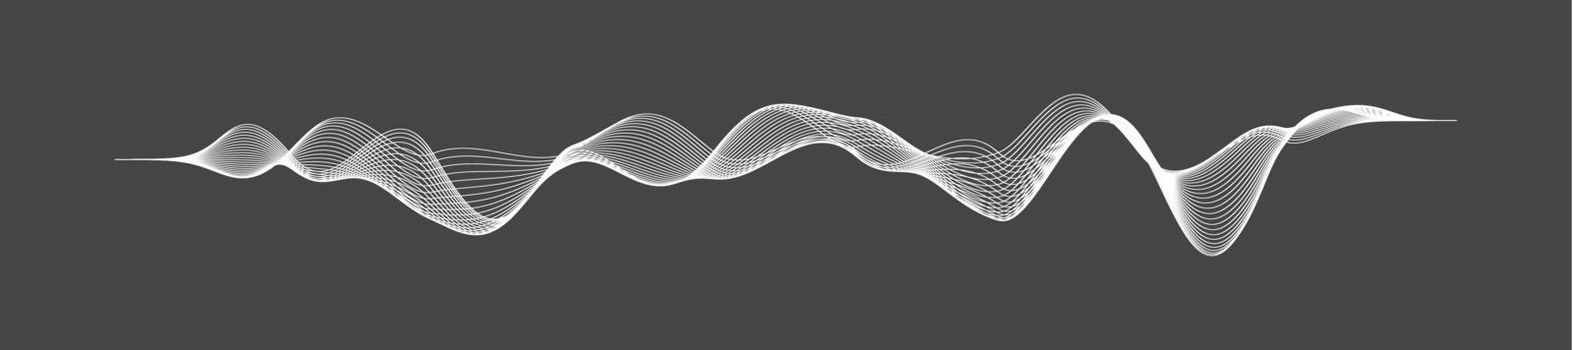 Radio waves vector. Radio frequency identification. Wireless communication. Sound waves abstract vector illustration